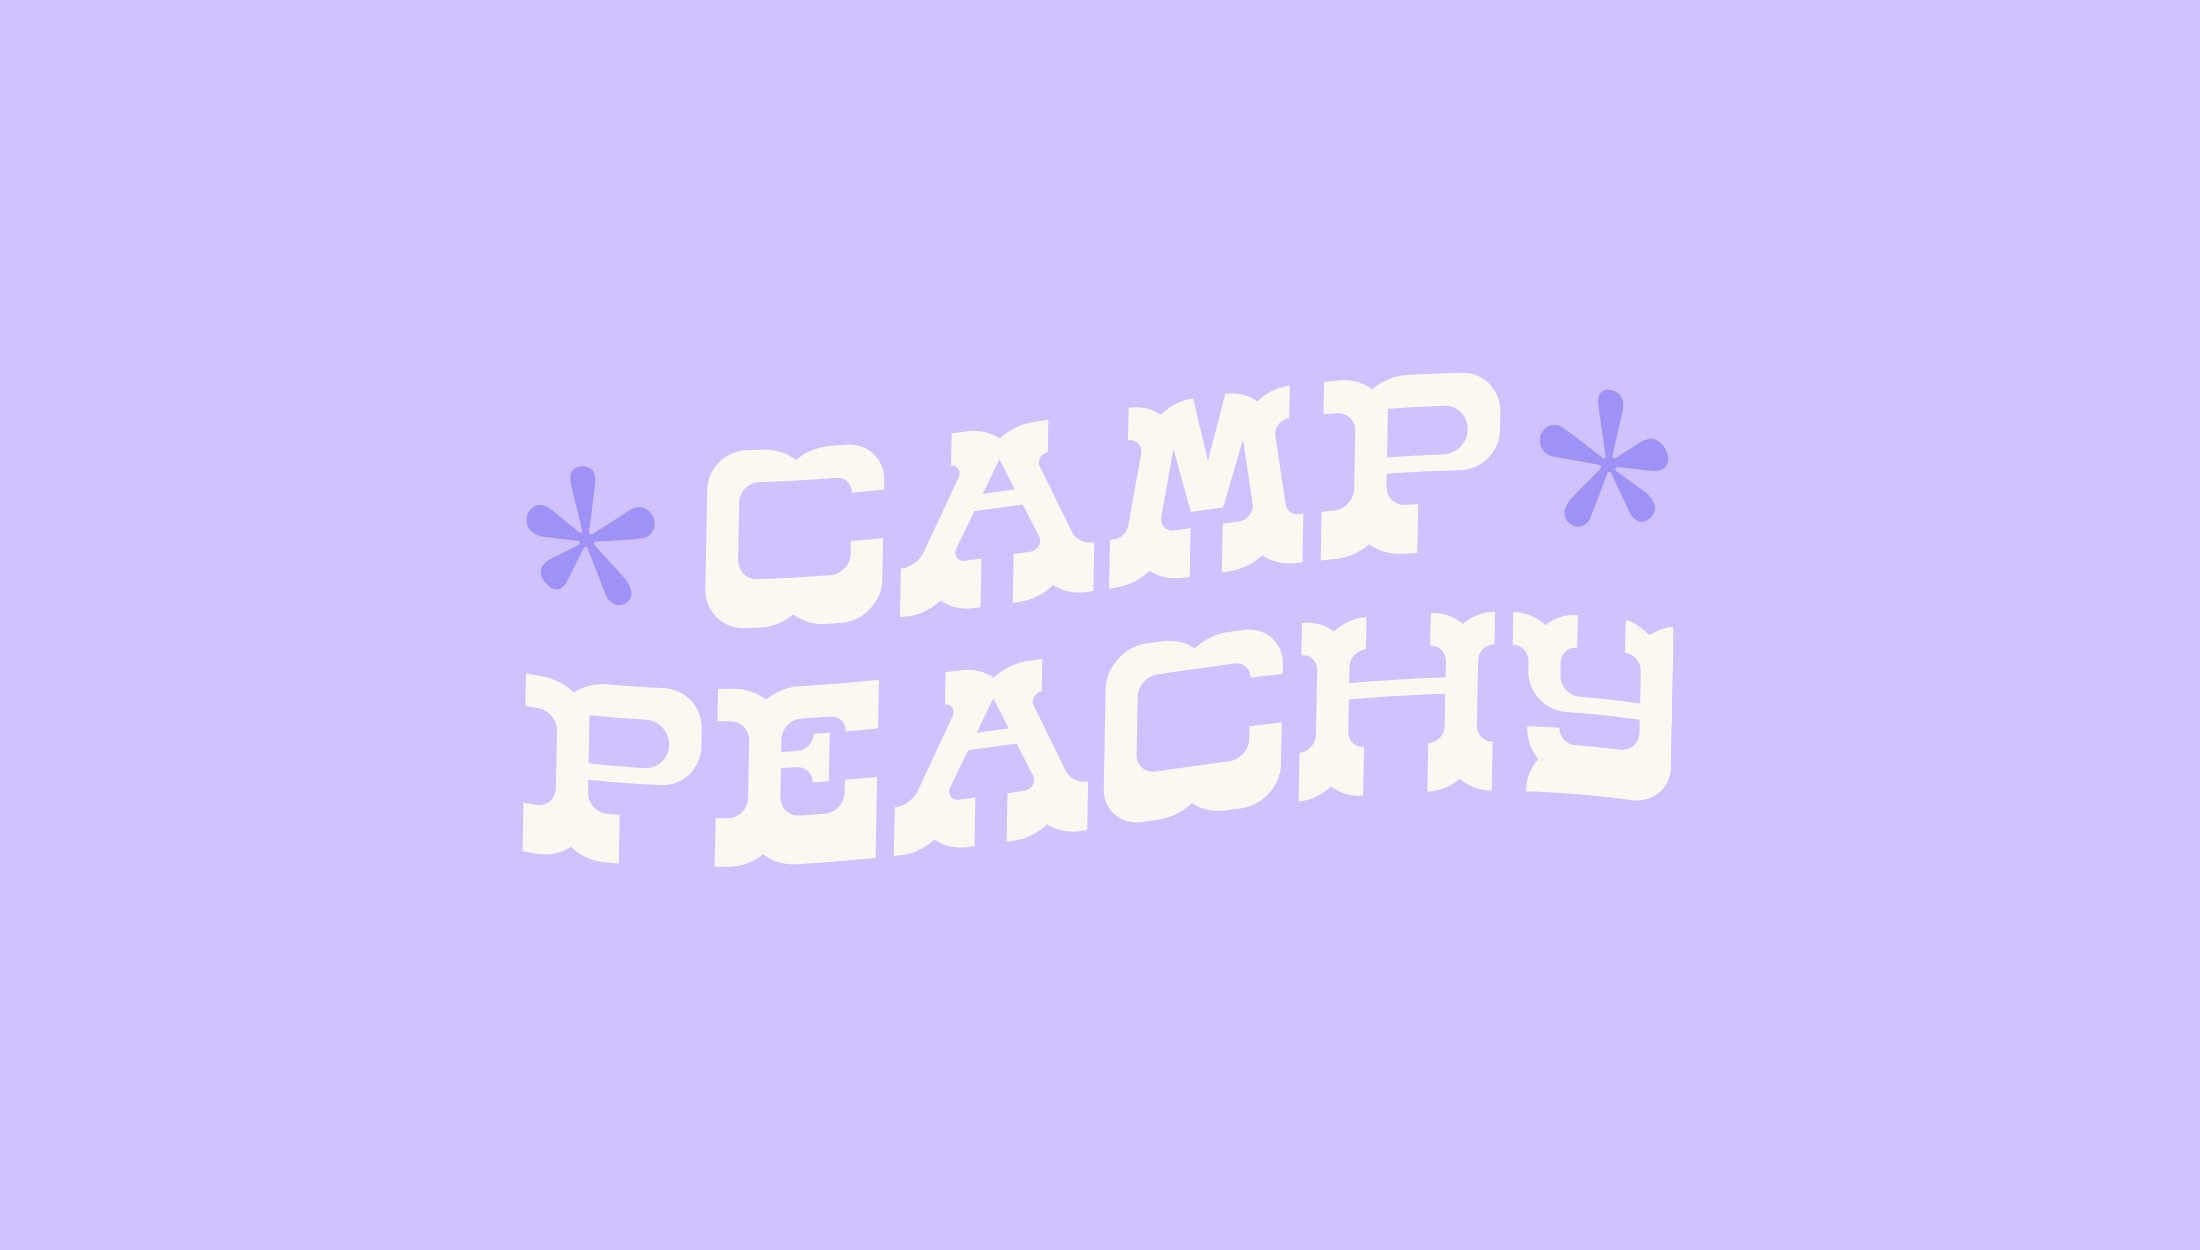 Camp Peachy typography for Stay Peachy, an online store selling Megan Plays merchandise - designed by Wiltshire-based graphic designer, Kaye Huett